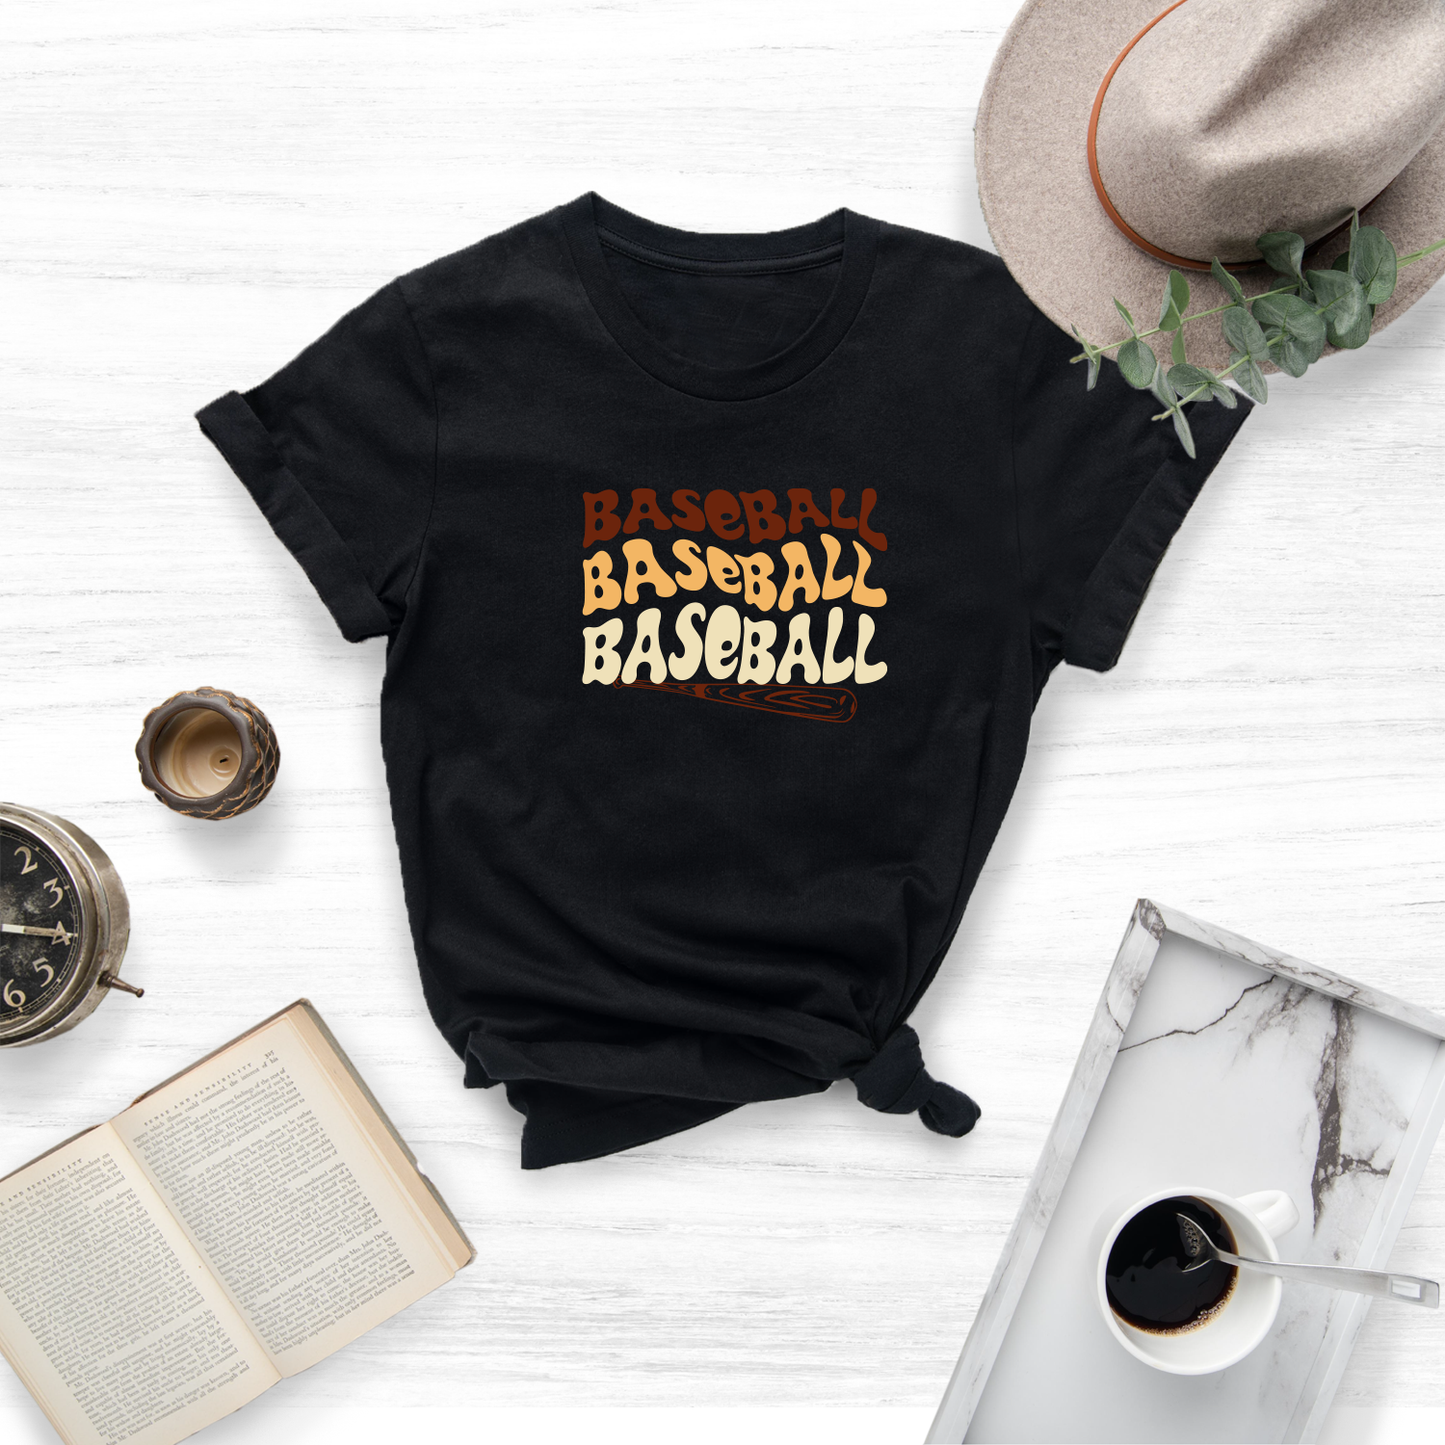 "Show your love for the game with this stylish and comfortable baseball t-shirt."